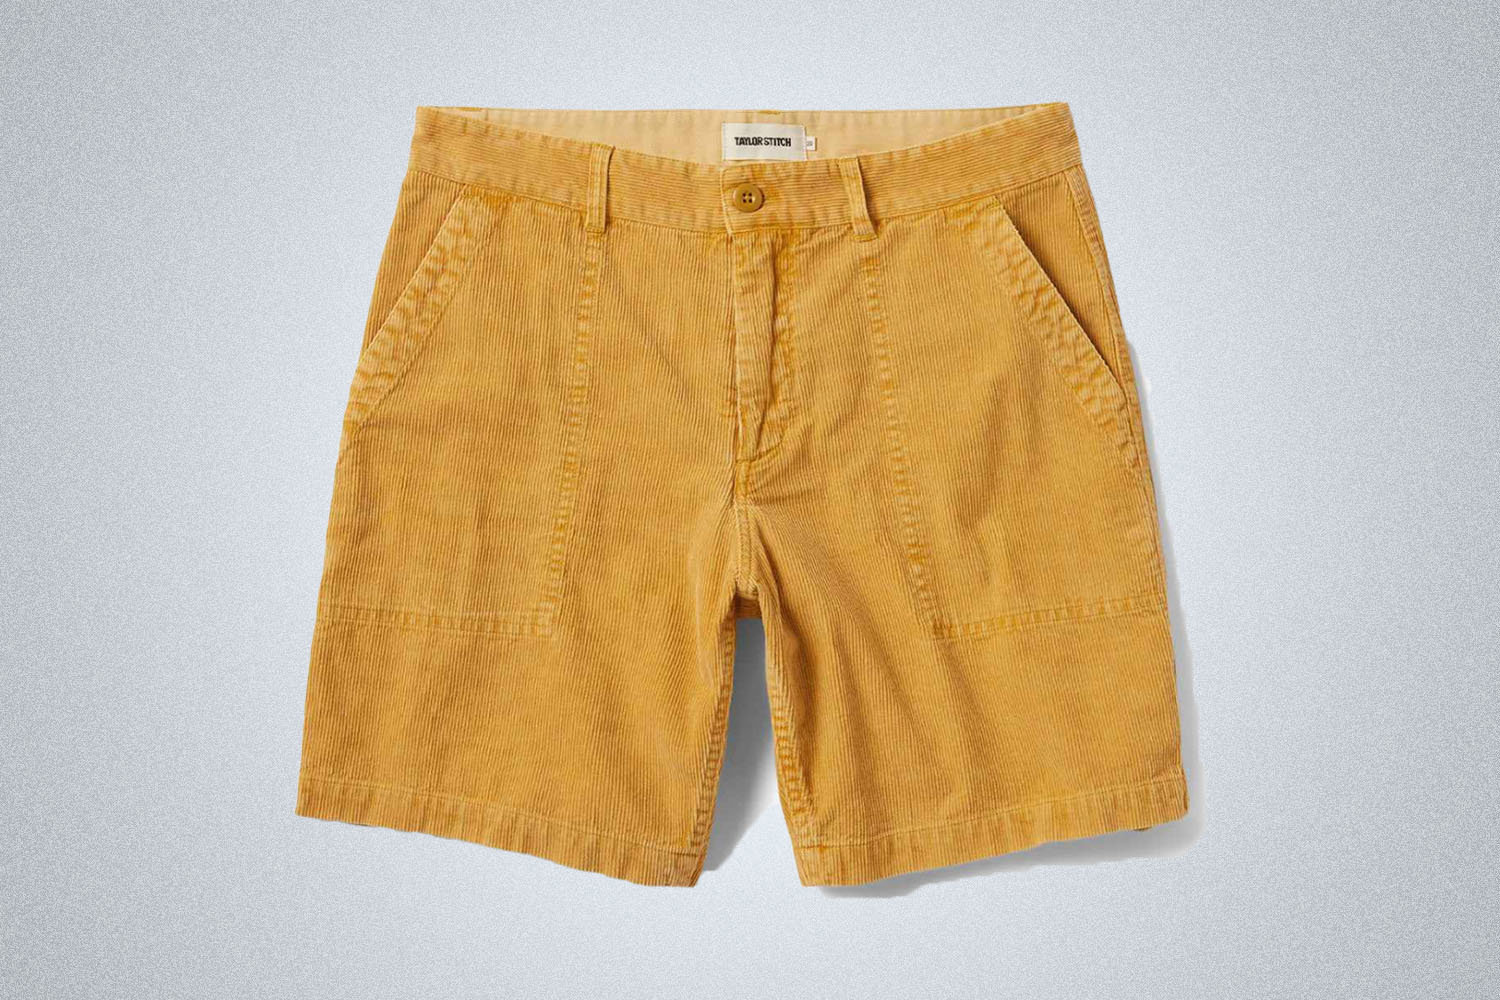 a pair of gold Taylor Stitch corduroy shorts on a grey background